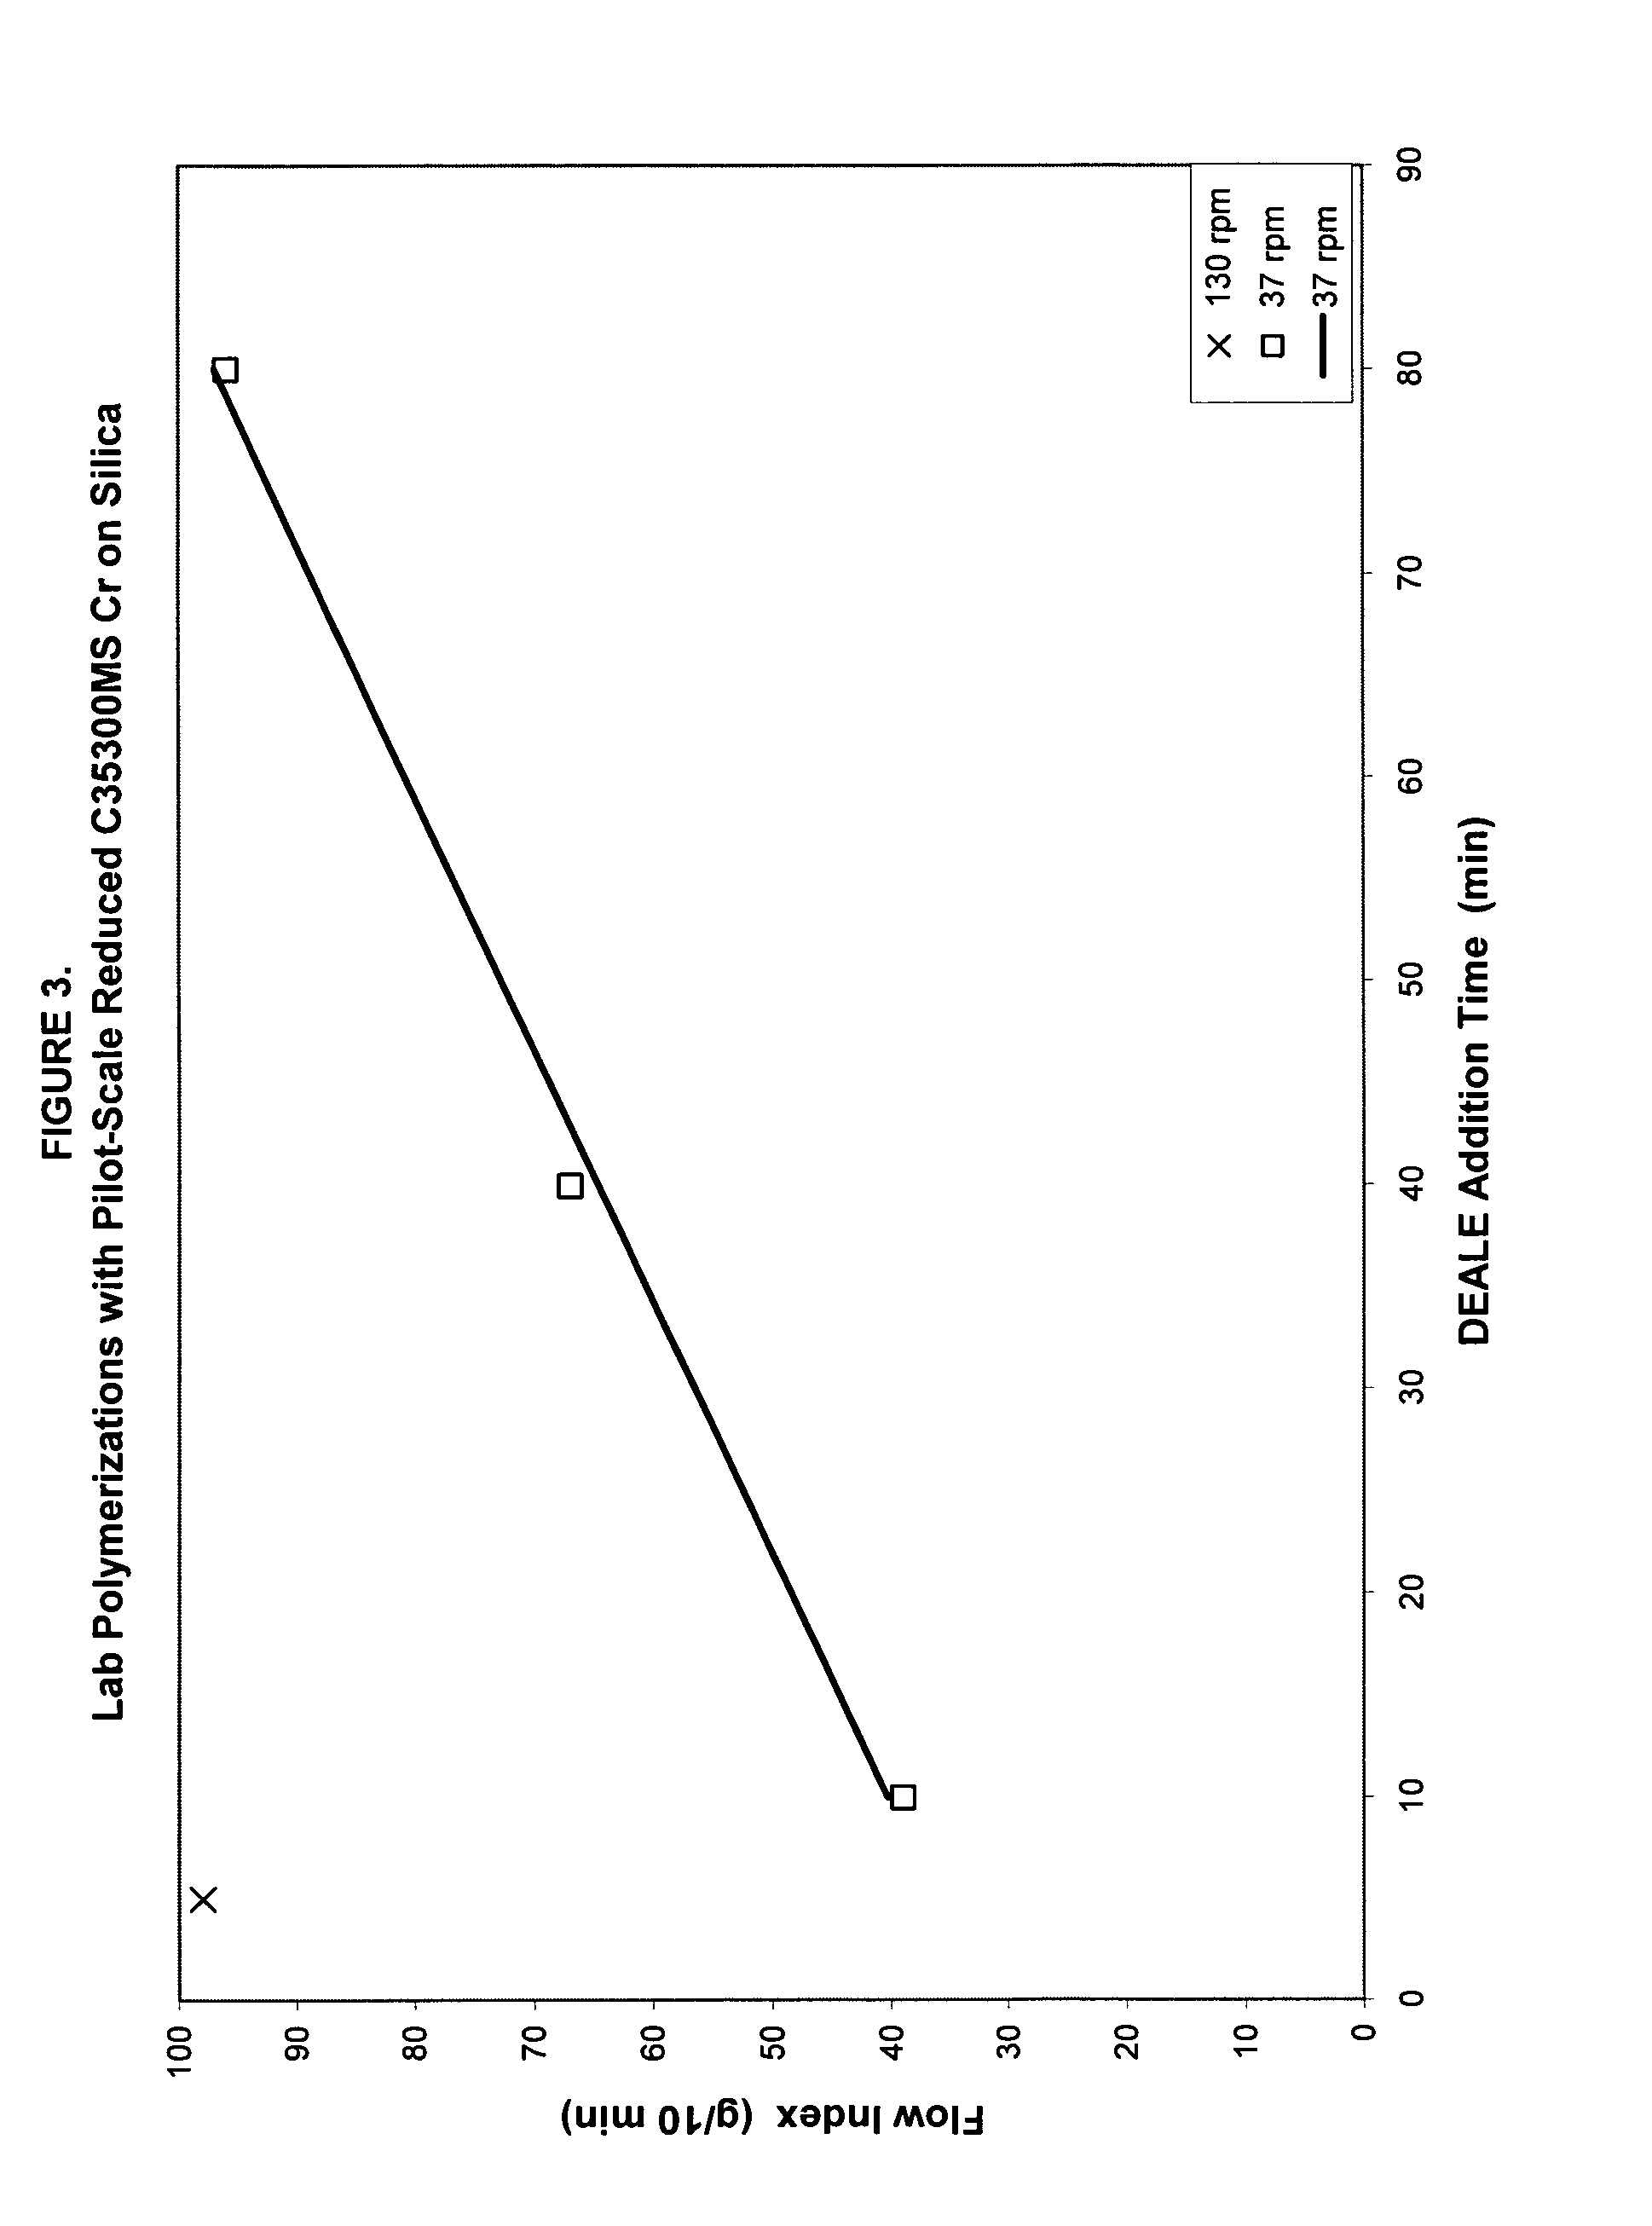 Modified Chromium-Based Catalysts and Polymerization Processes for Using the Same